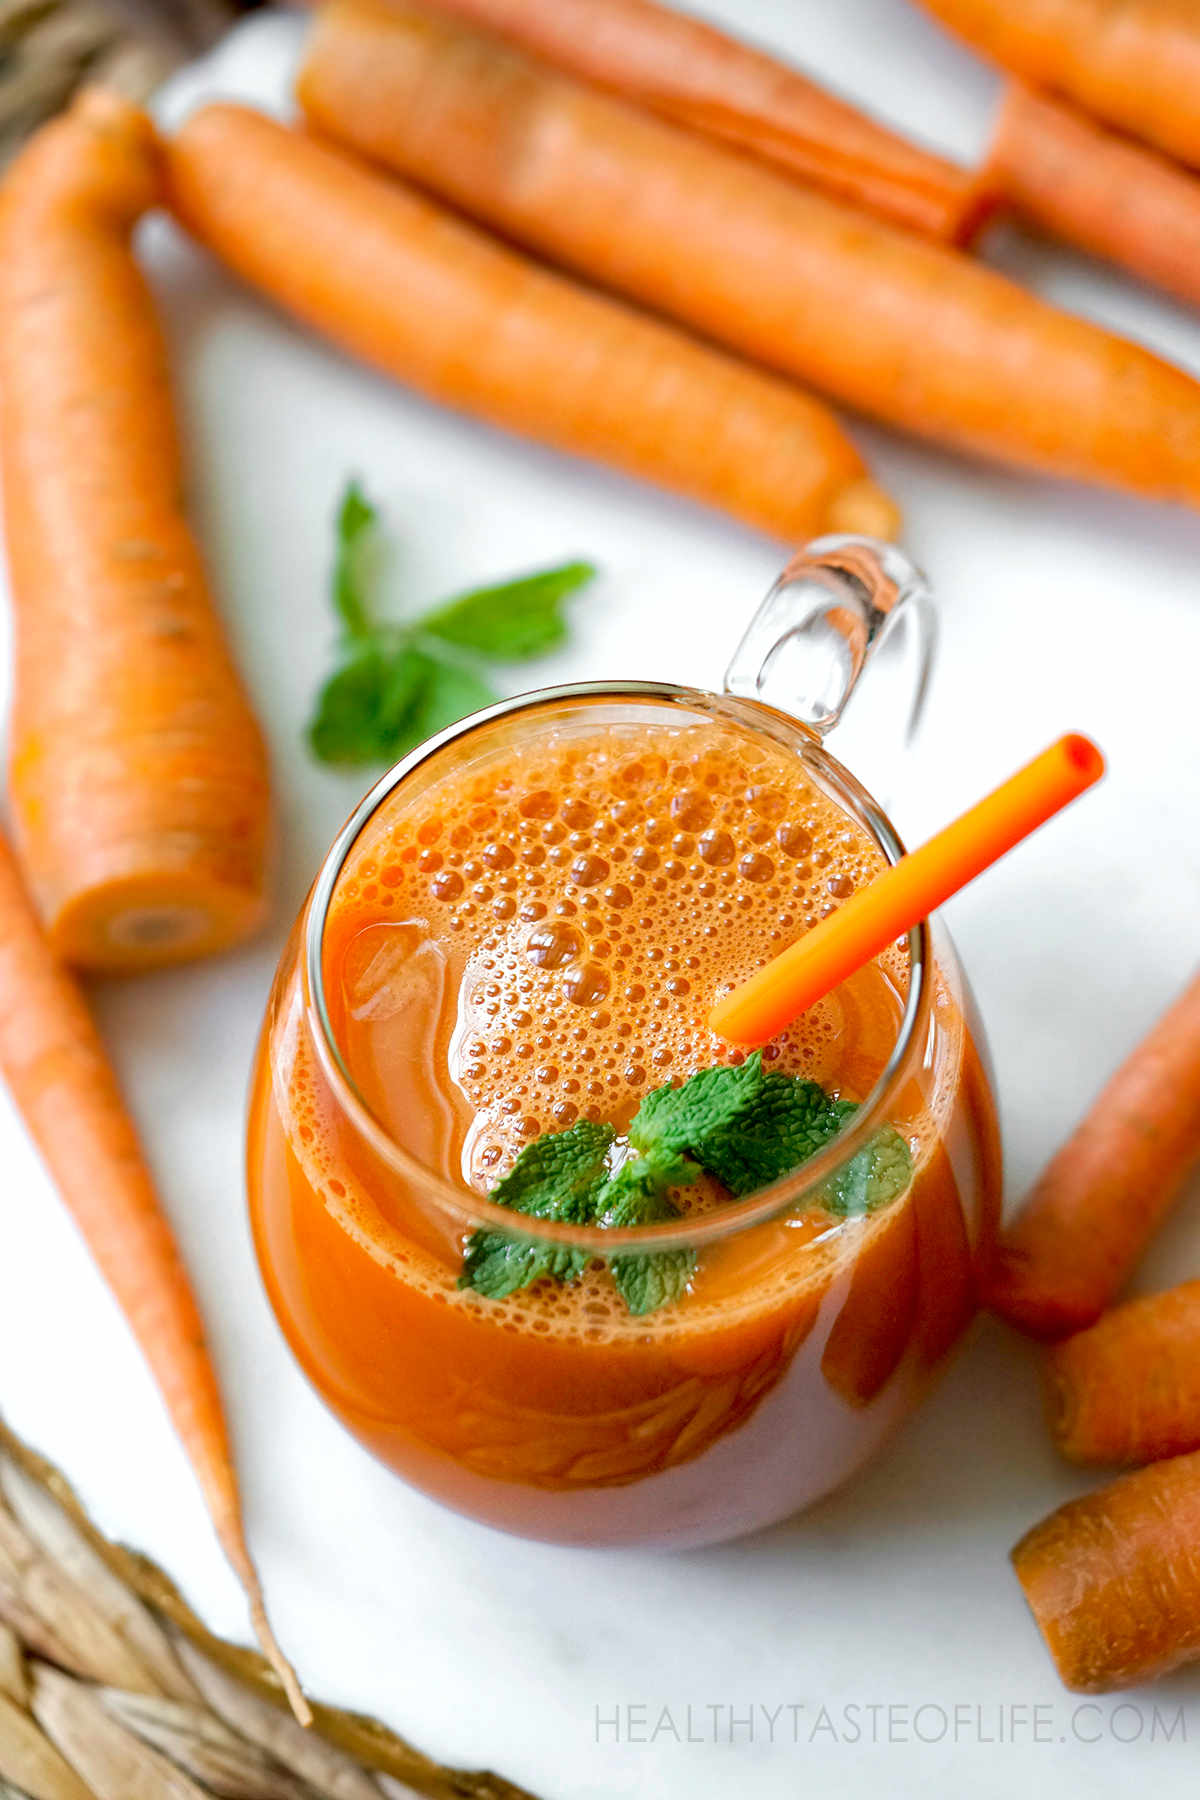 A glass mug filled with fresh carrot juice made with a juicer and blender. Homemade carrot juice recipe.
